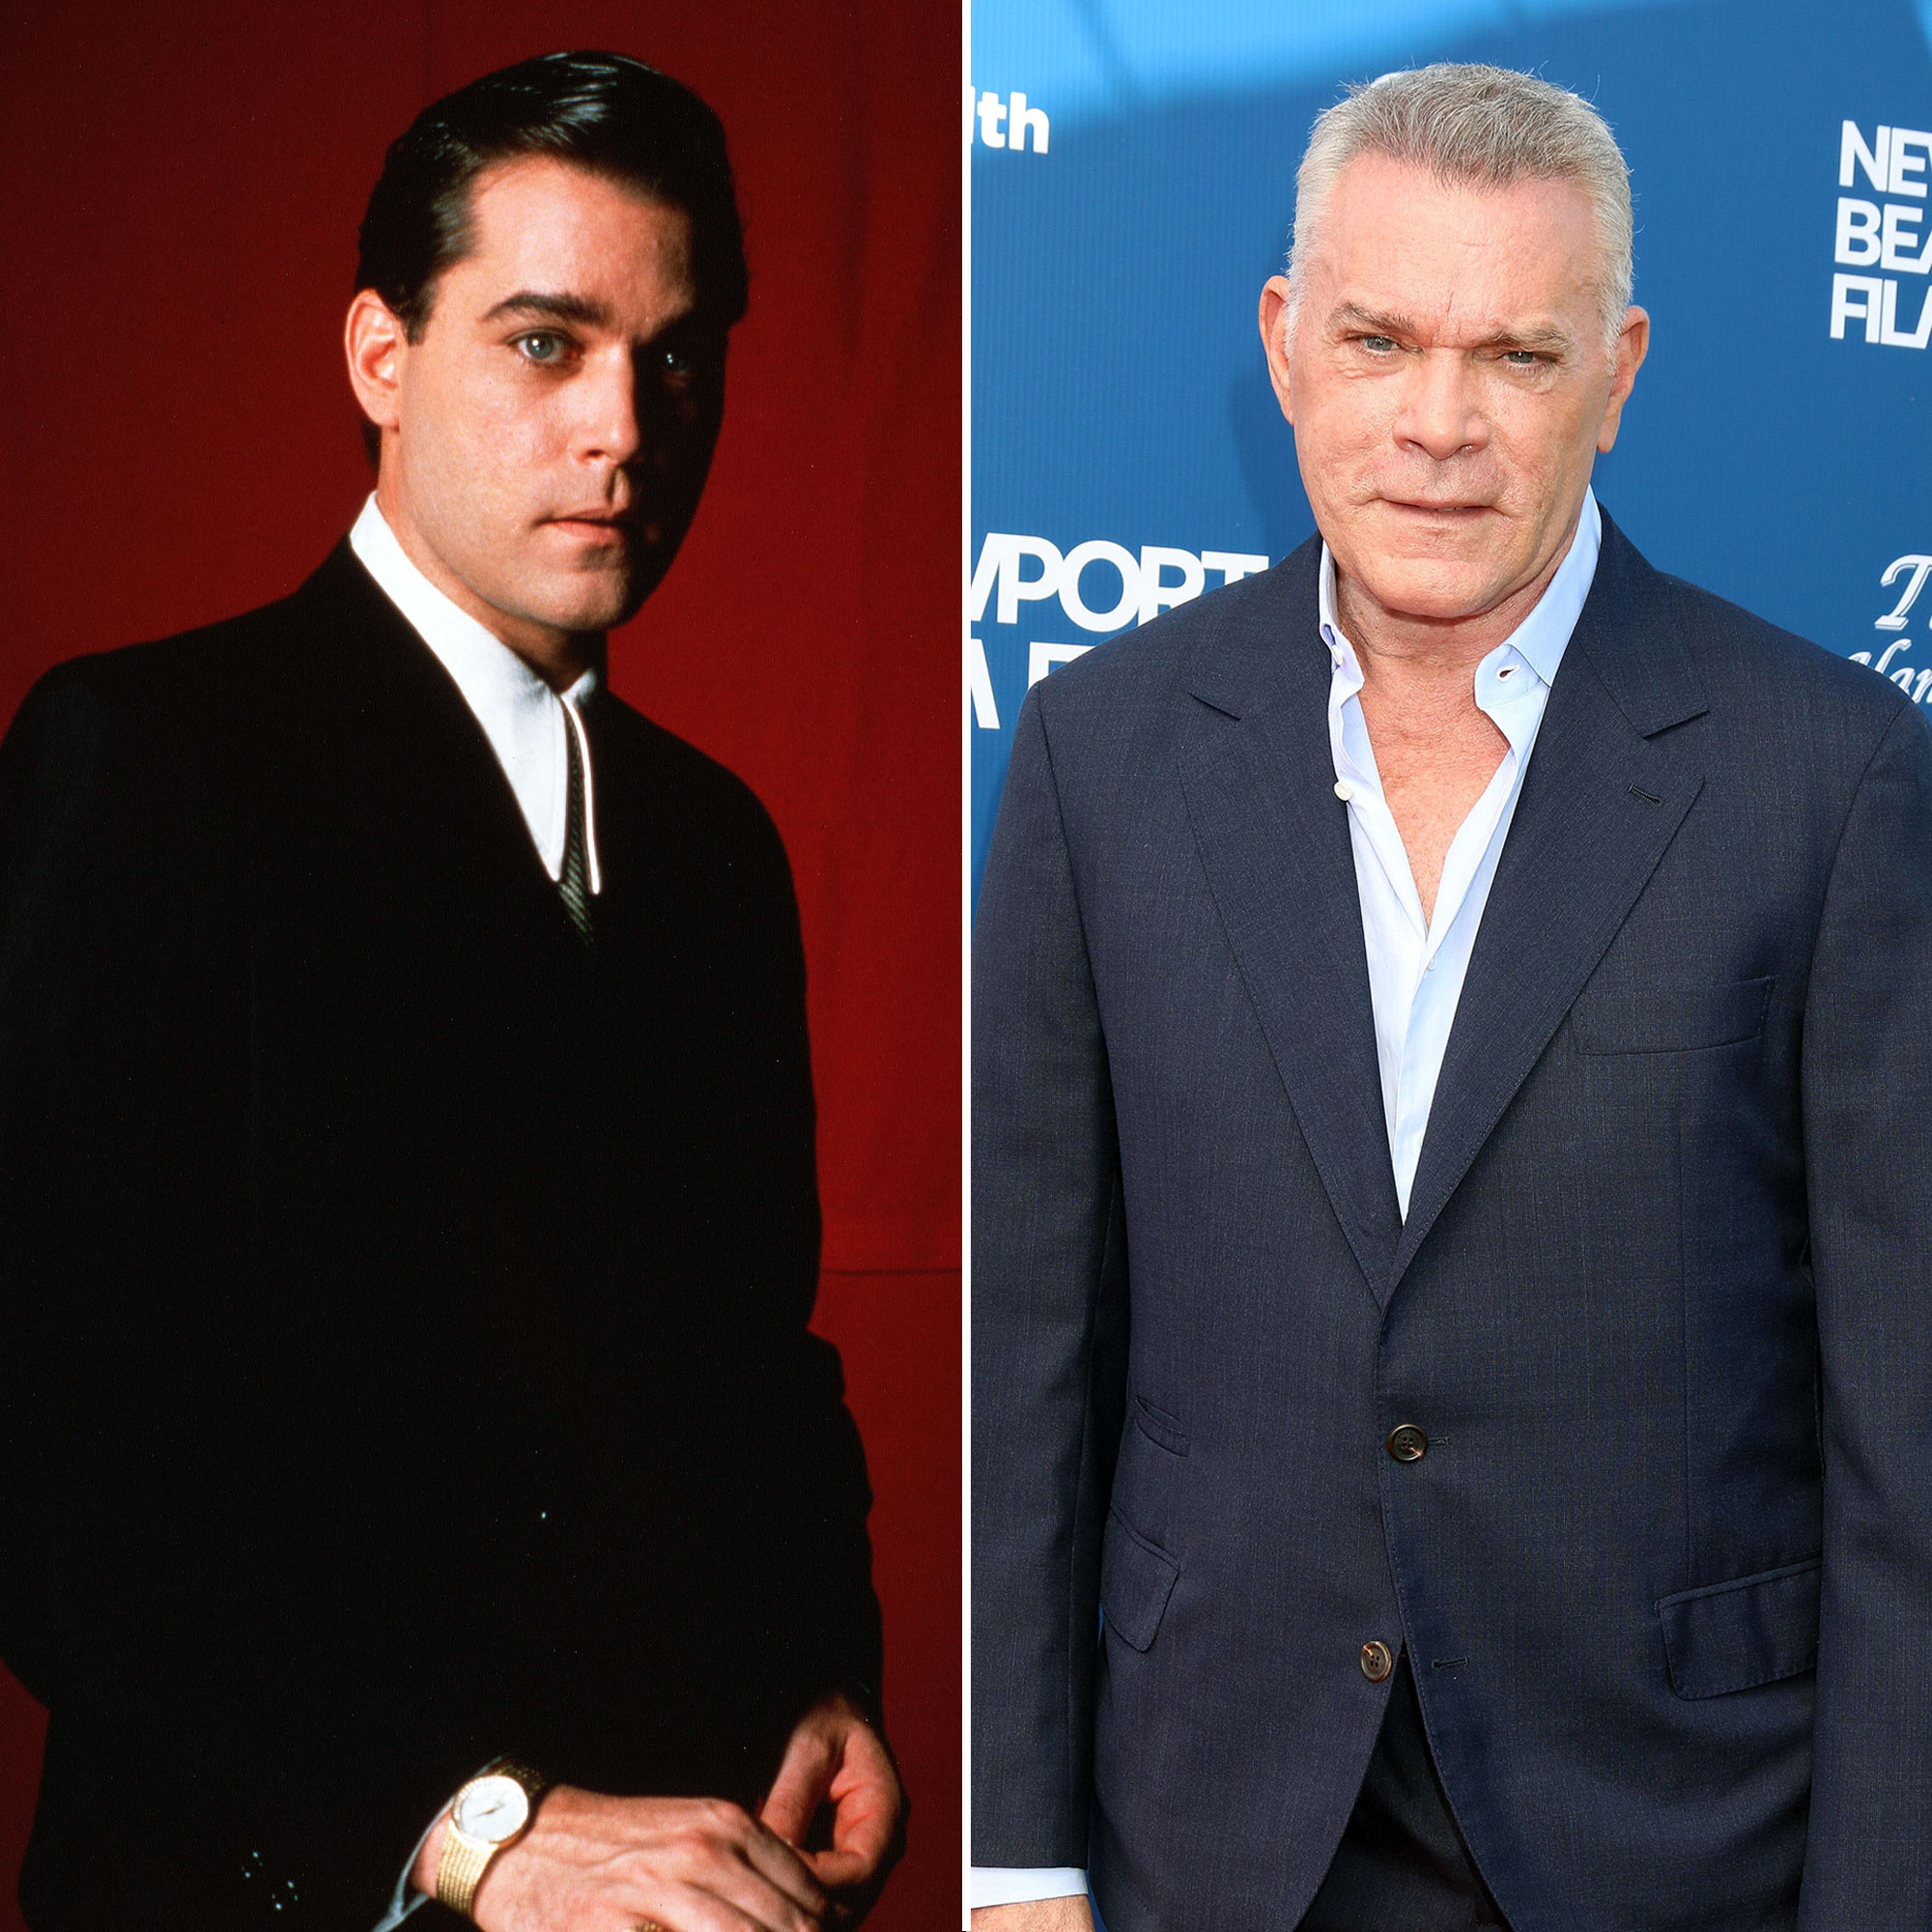 Ray Liotta, Goodfellas and Field of Dreams star, dies at 67 | wcnc.com